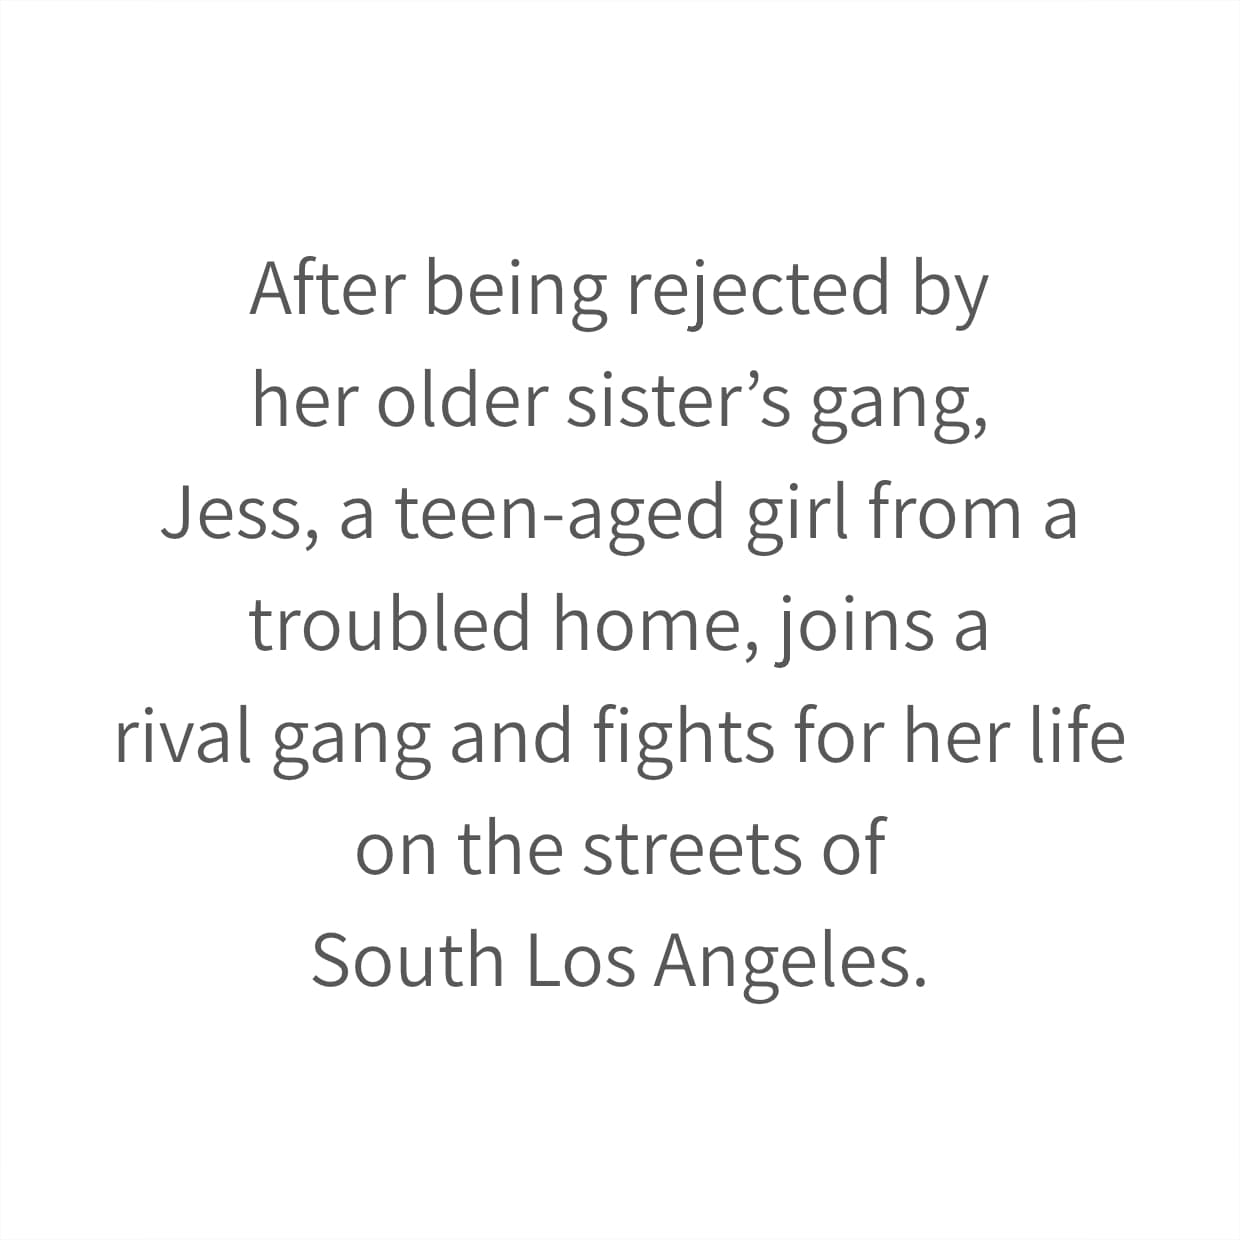 After being rejected by her older sister’s gang, Jess, a teen-aged girl from a troubled home, joins a rival gang and fights for her life on the streets of South Los Angeles.